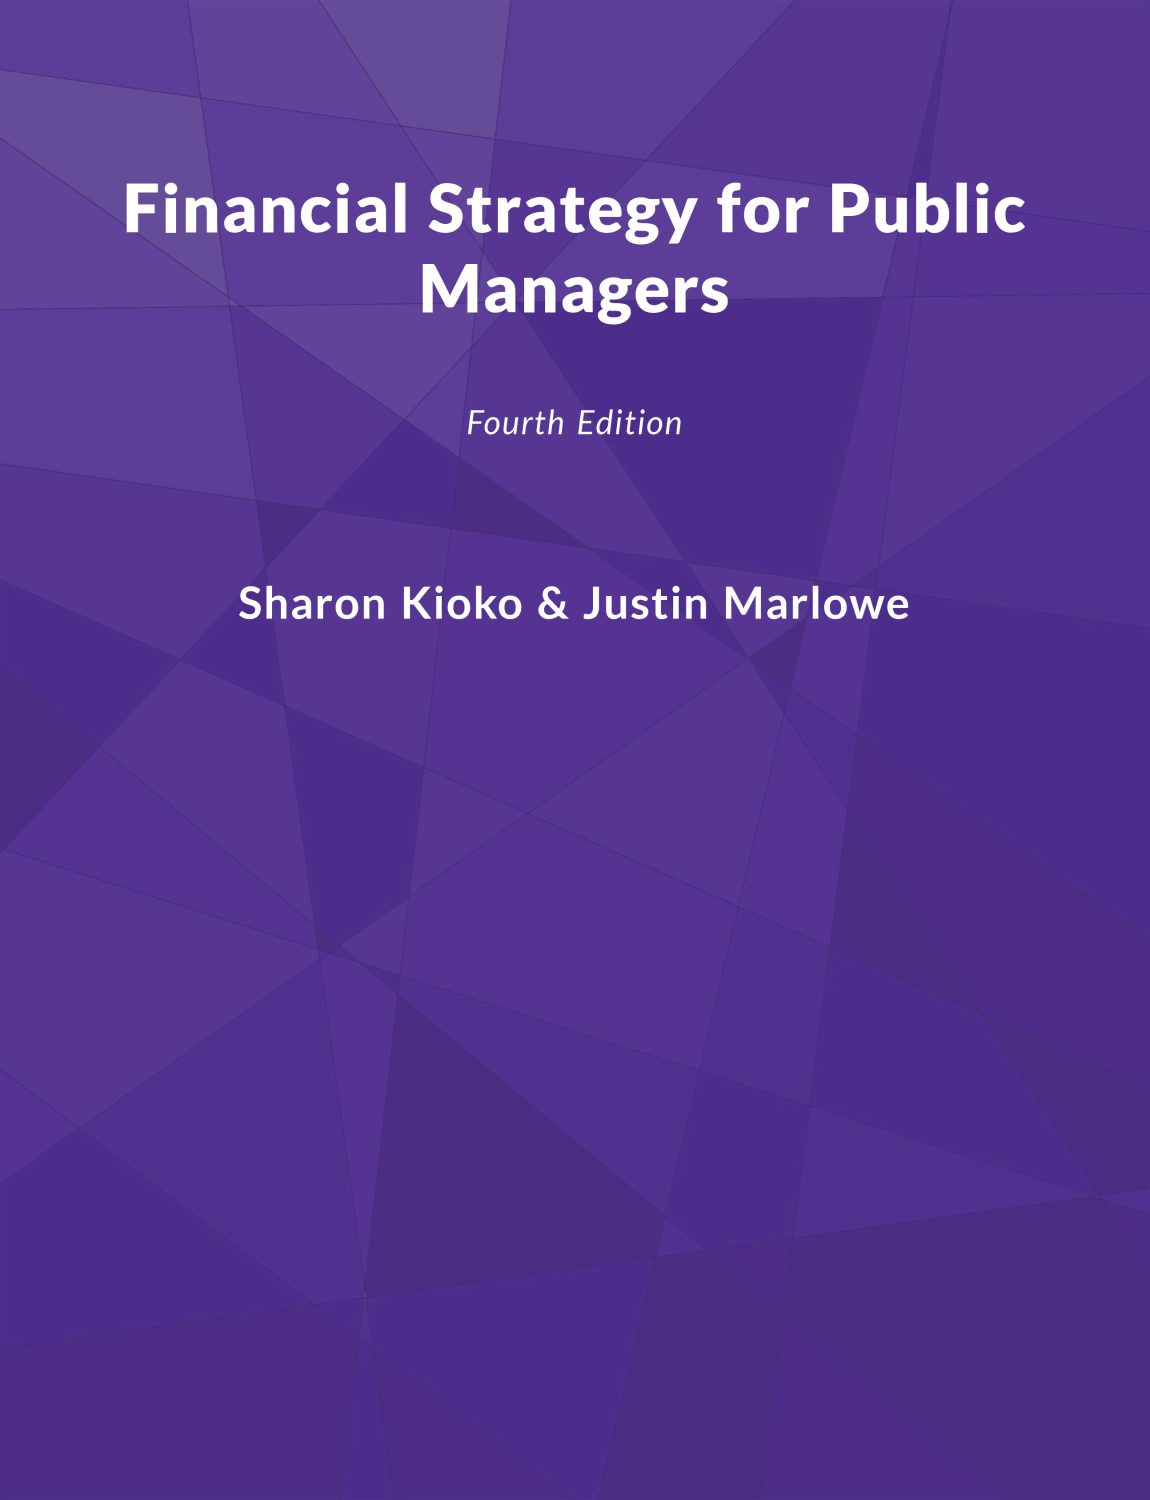 Financial Strategy for Public Managers book cover